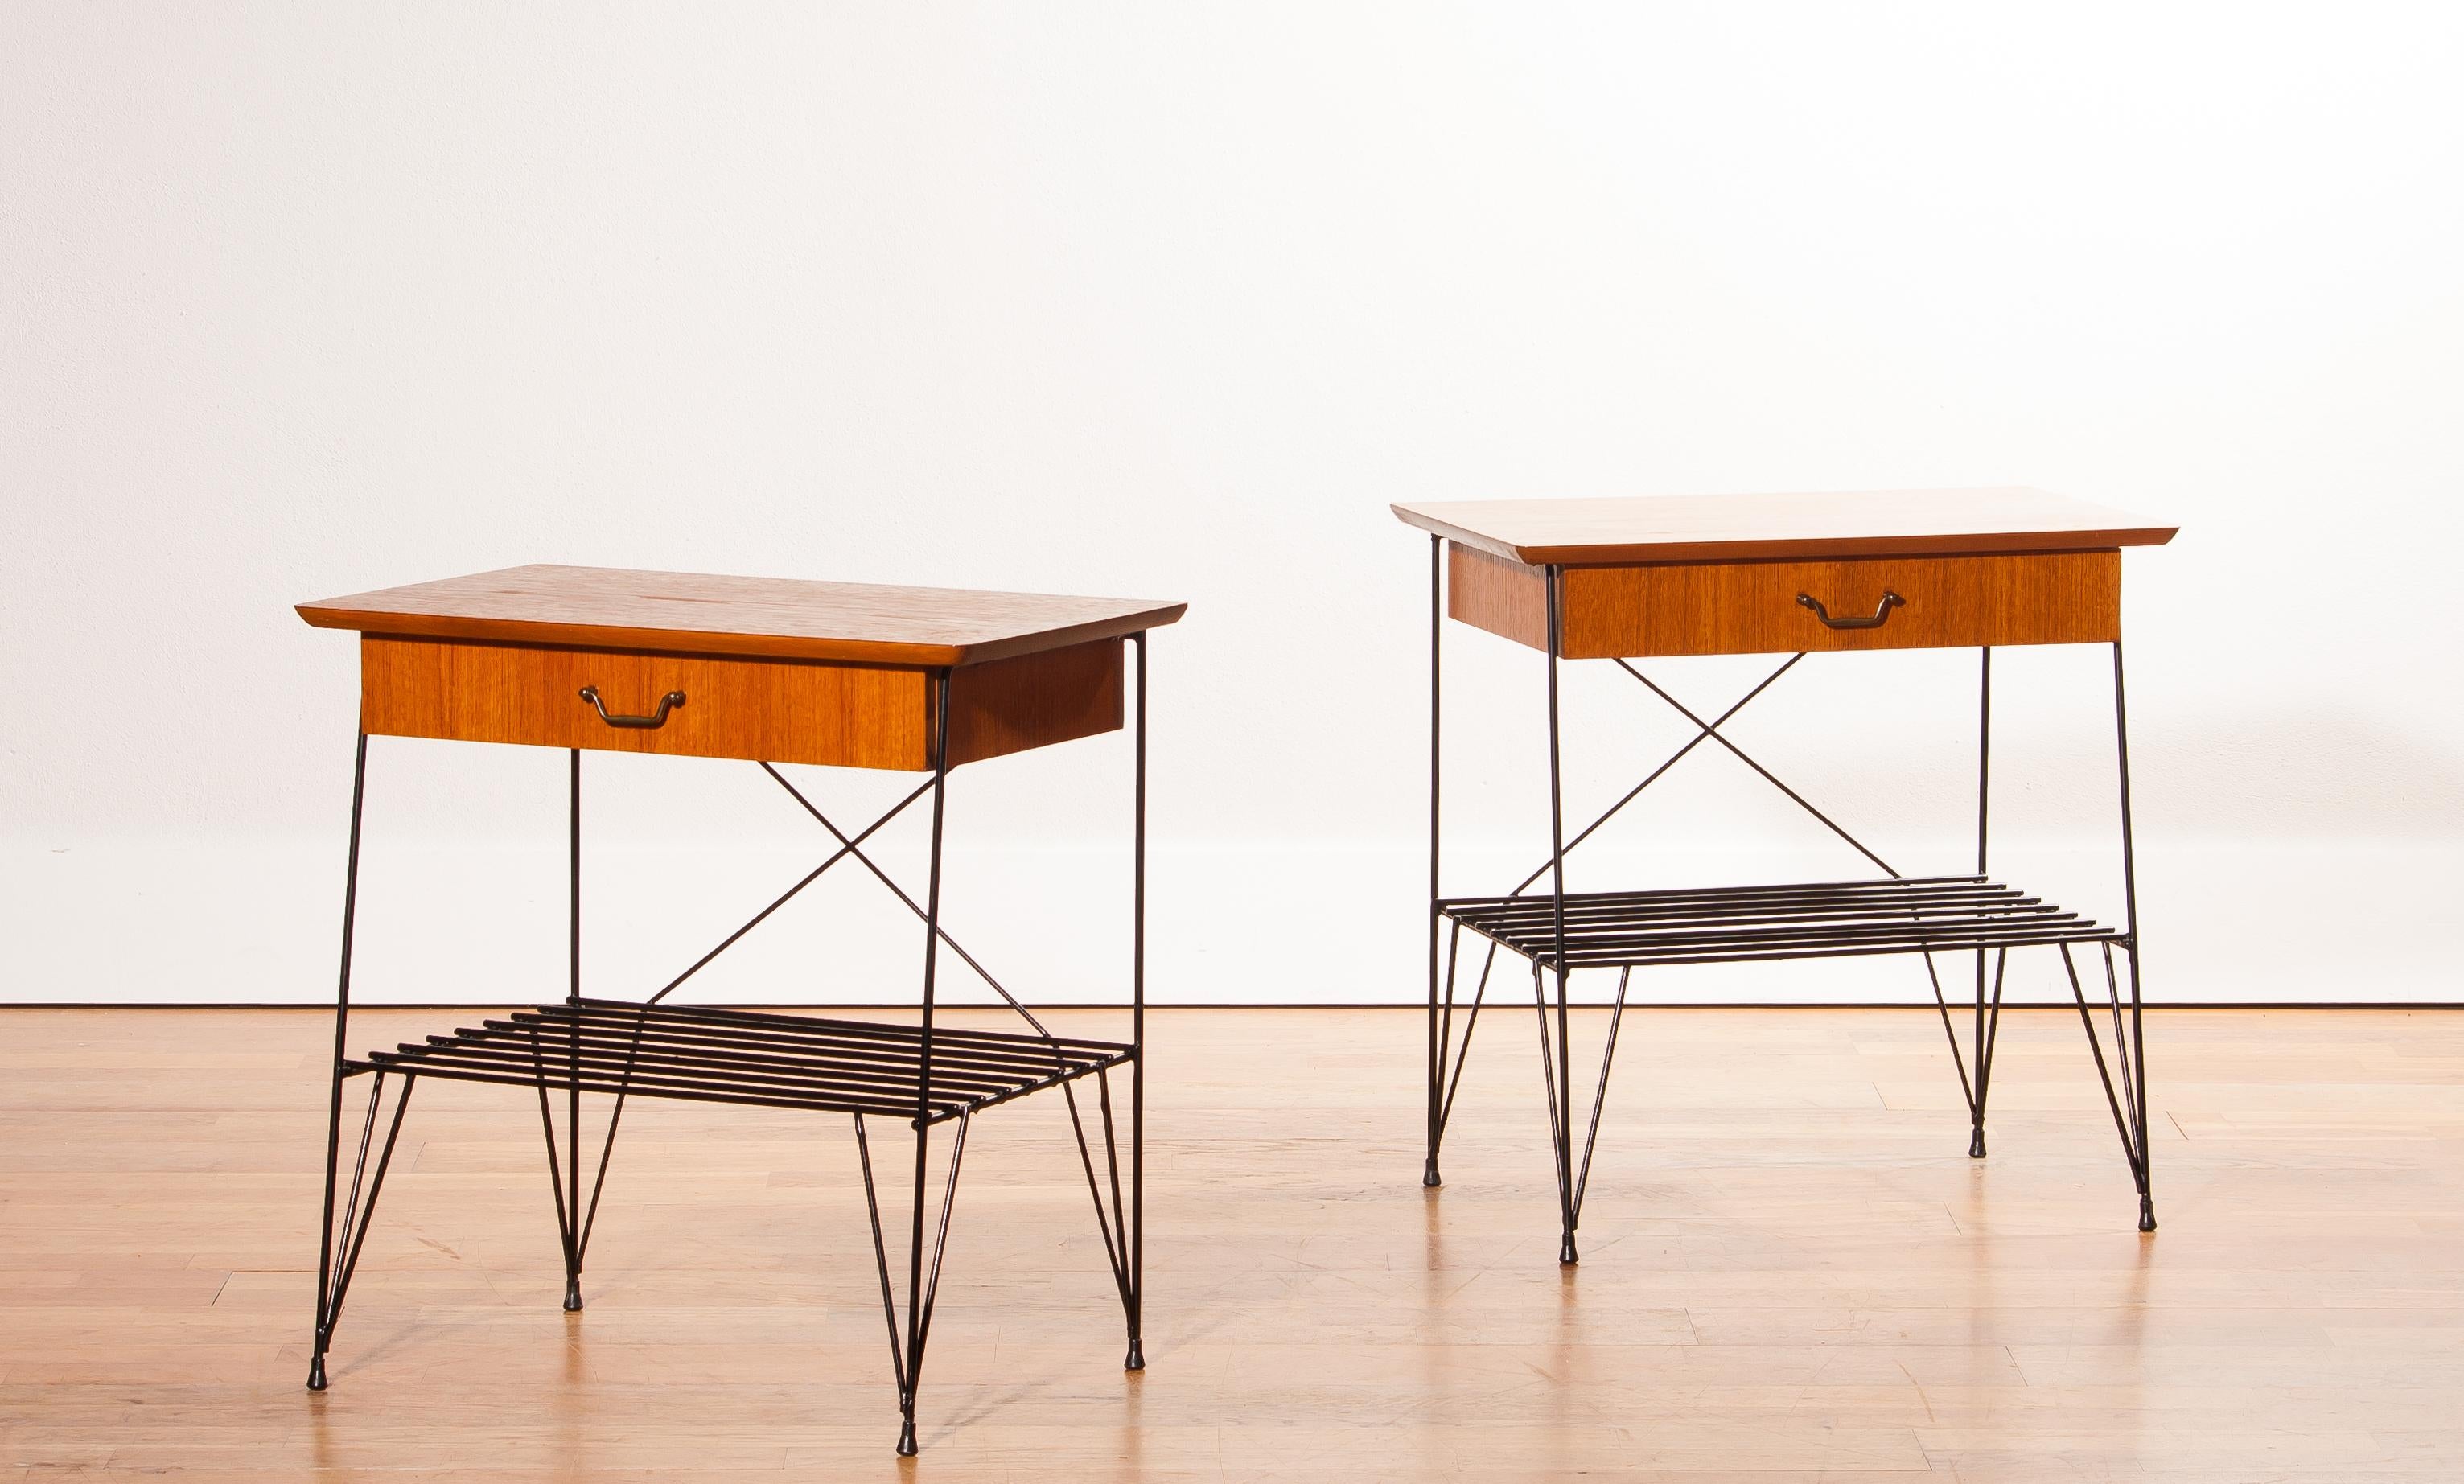 Exclusive nightstands or side tables in the famous Gullberg style.
The set is in perfect condition.
Made of black metal in combination with teak.
Period: 1950-1959, Sweden.
The dimensions are H 53 cm, W 52 cm, D 31 cm.